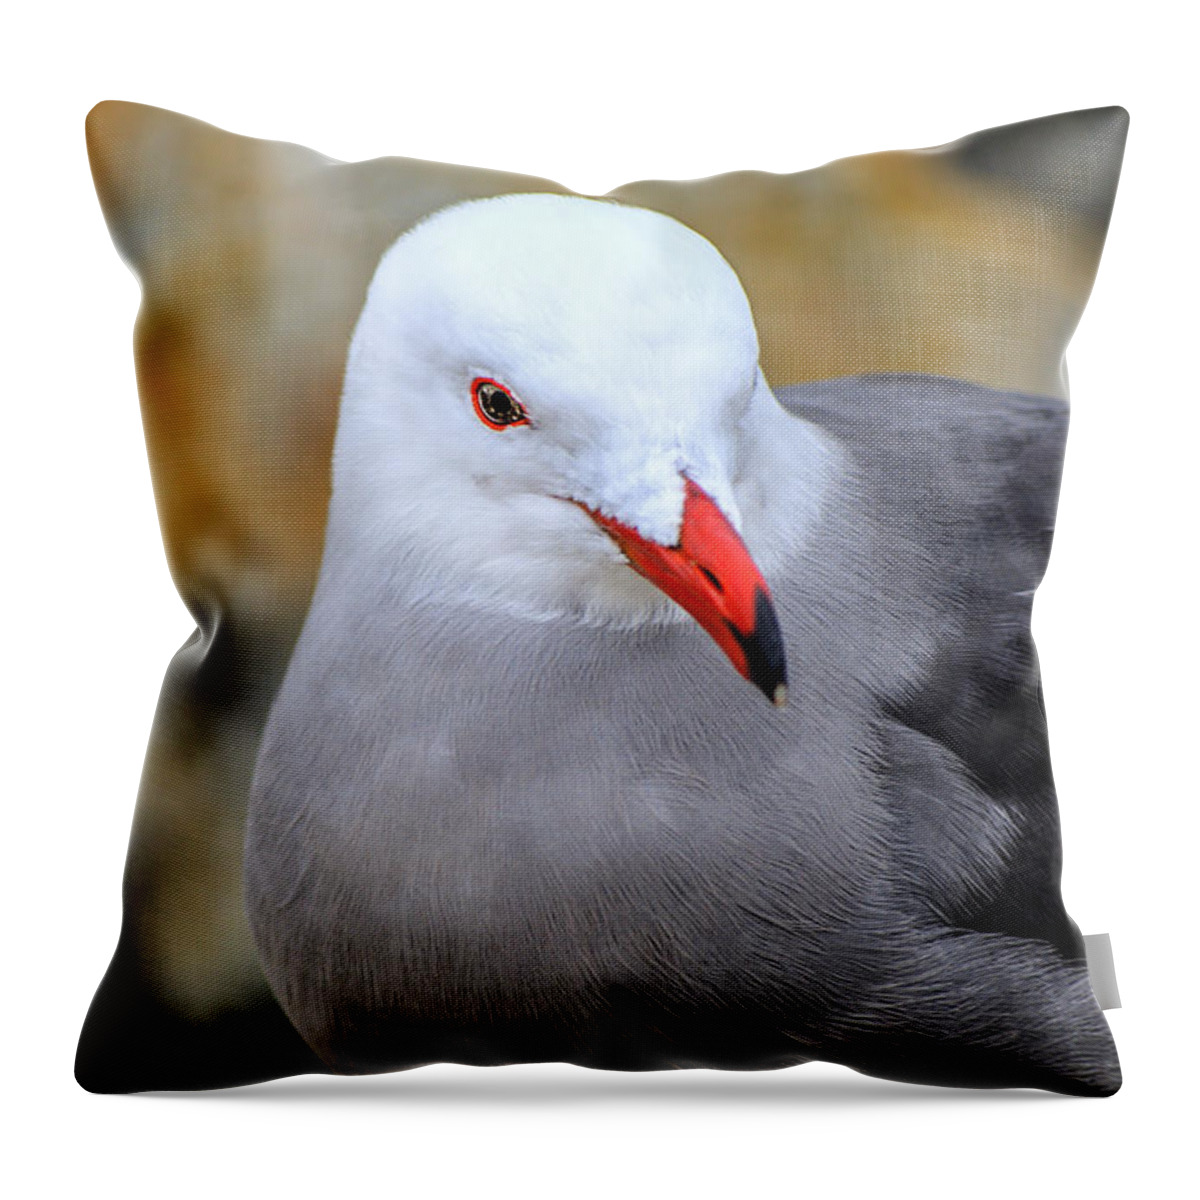 Seagull Throw Pillow featuring the photograph Red Beak Seagull Portrait by Diego Re